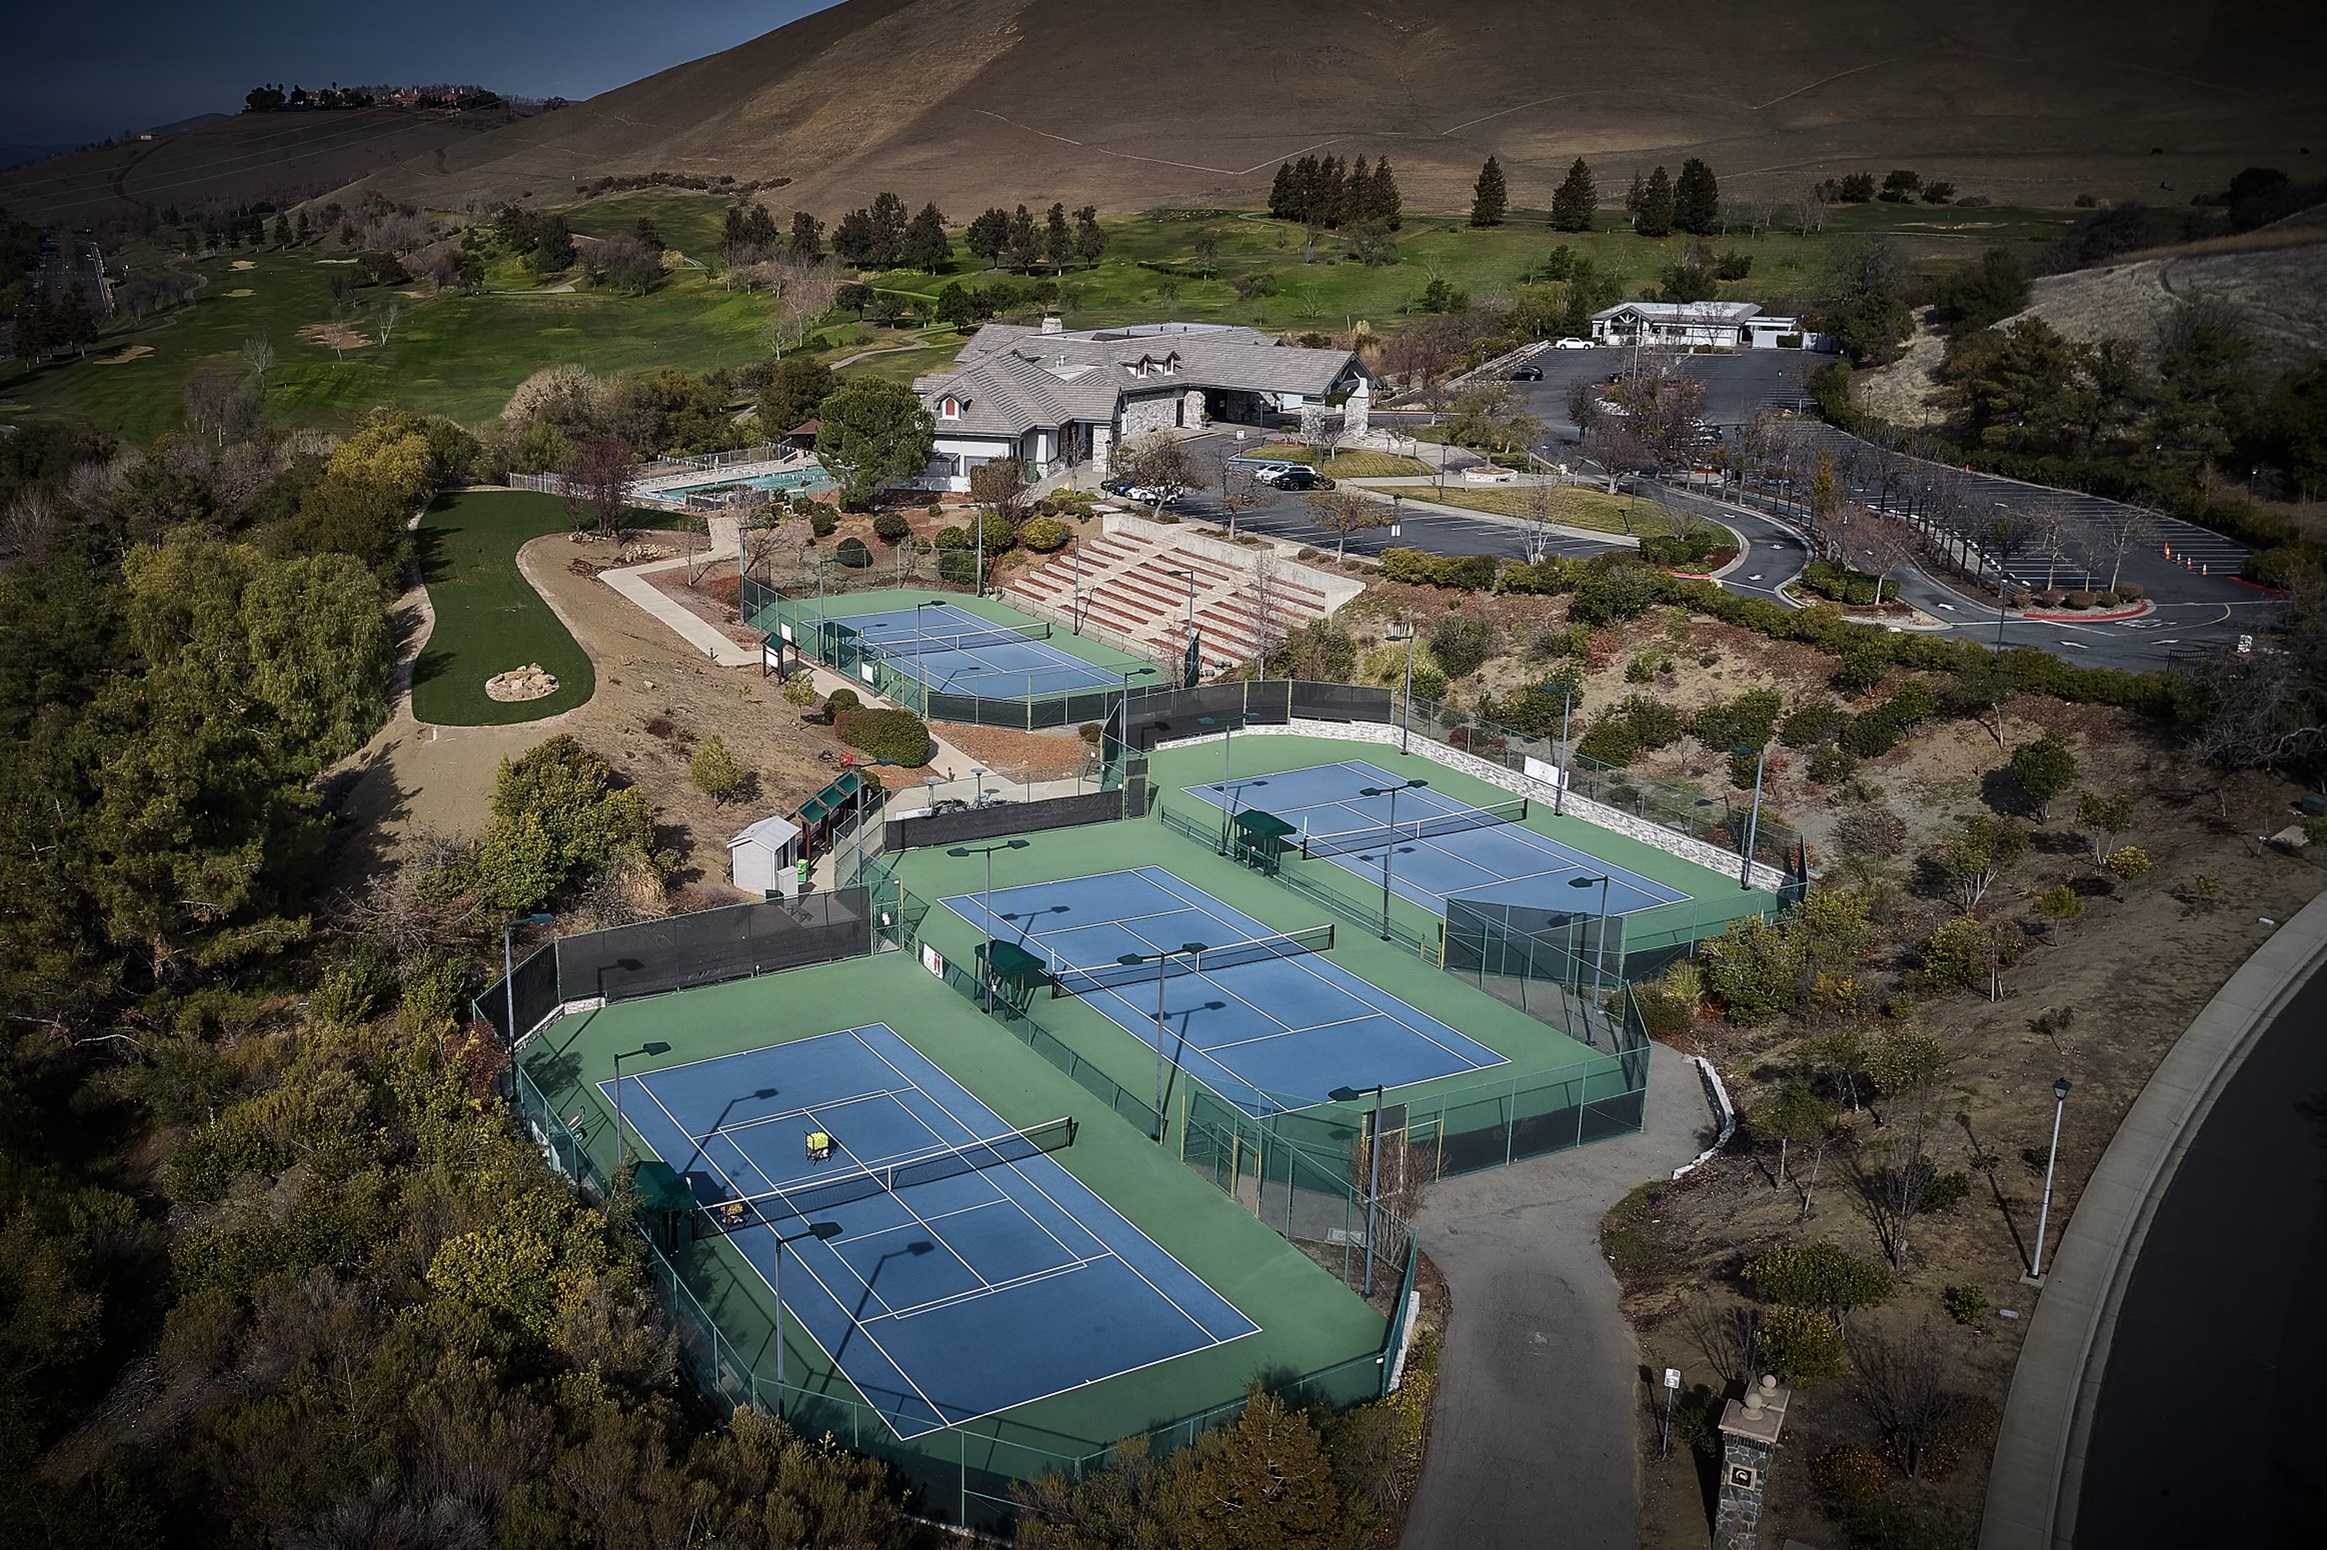 LIGHTED TENNIS COURTS